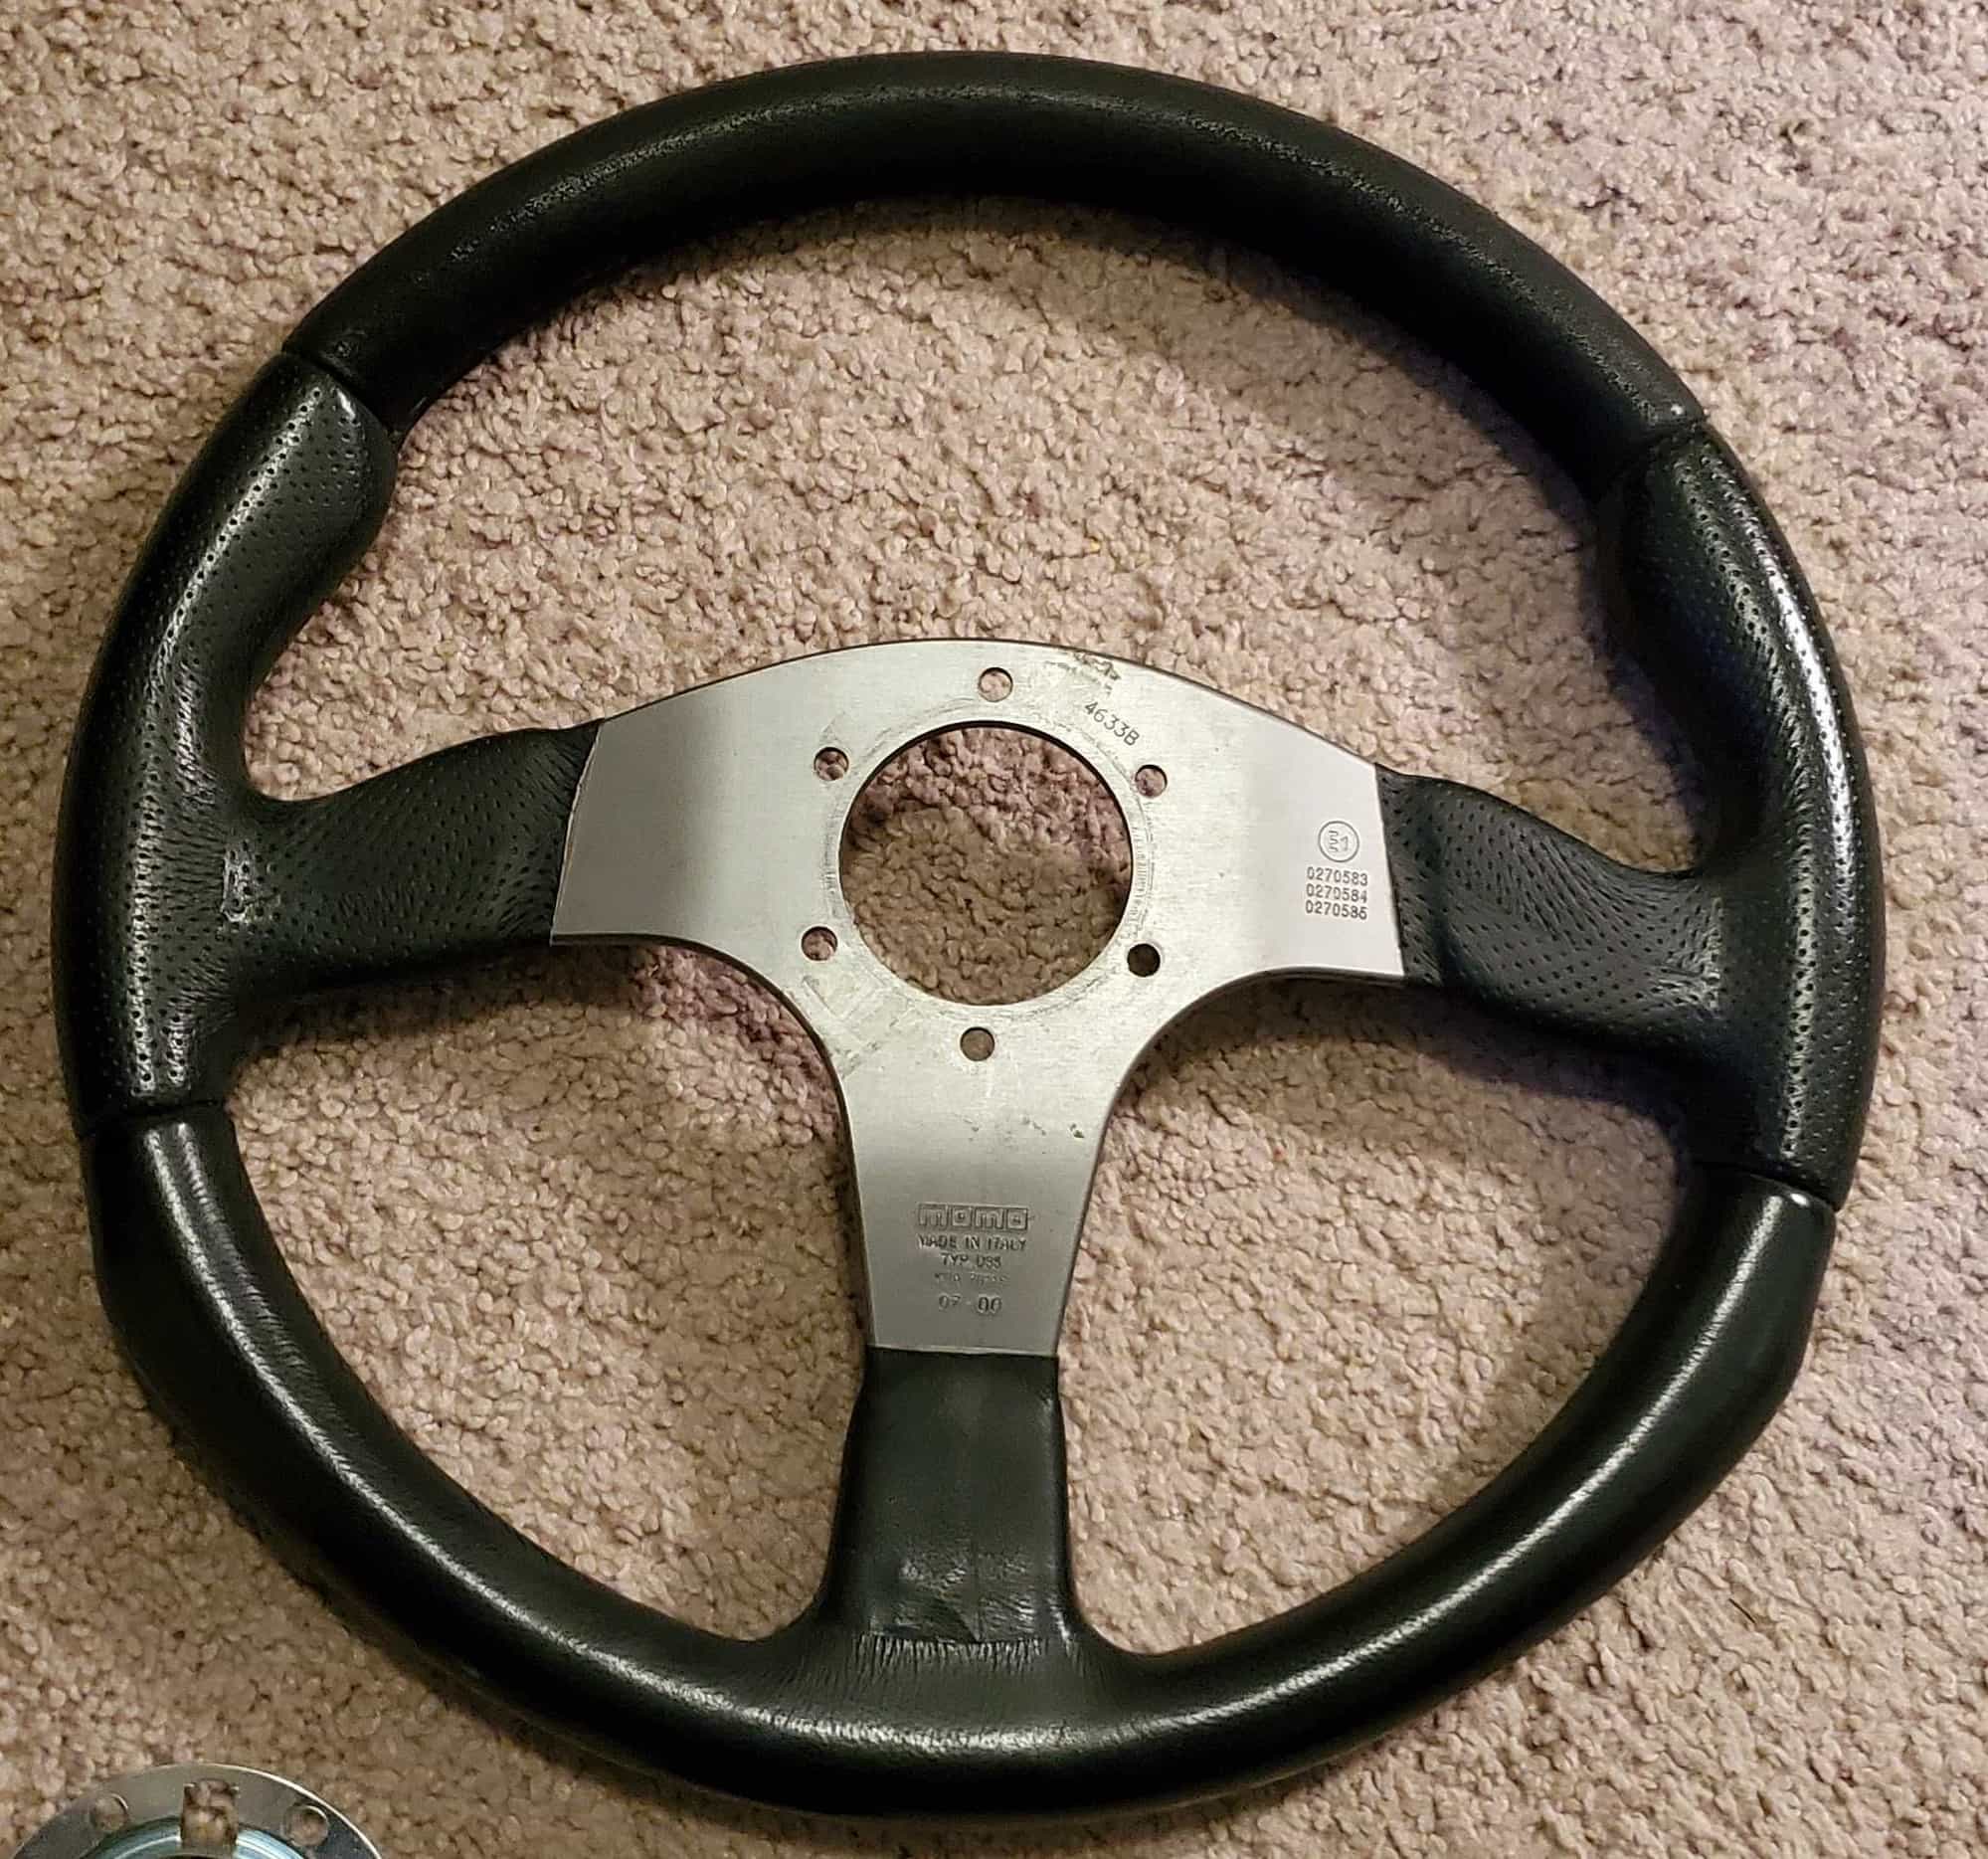 Interior/Upholstery - MOMO Champion Steering Wheel, widefoot pedal extender, A/C compressor and lines - Used - All Years Any Make All Models - Austin, TX 78610, United States